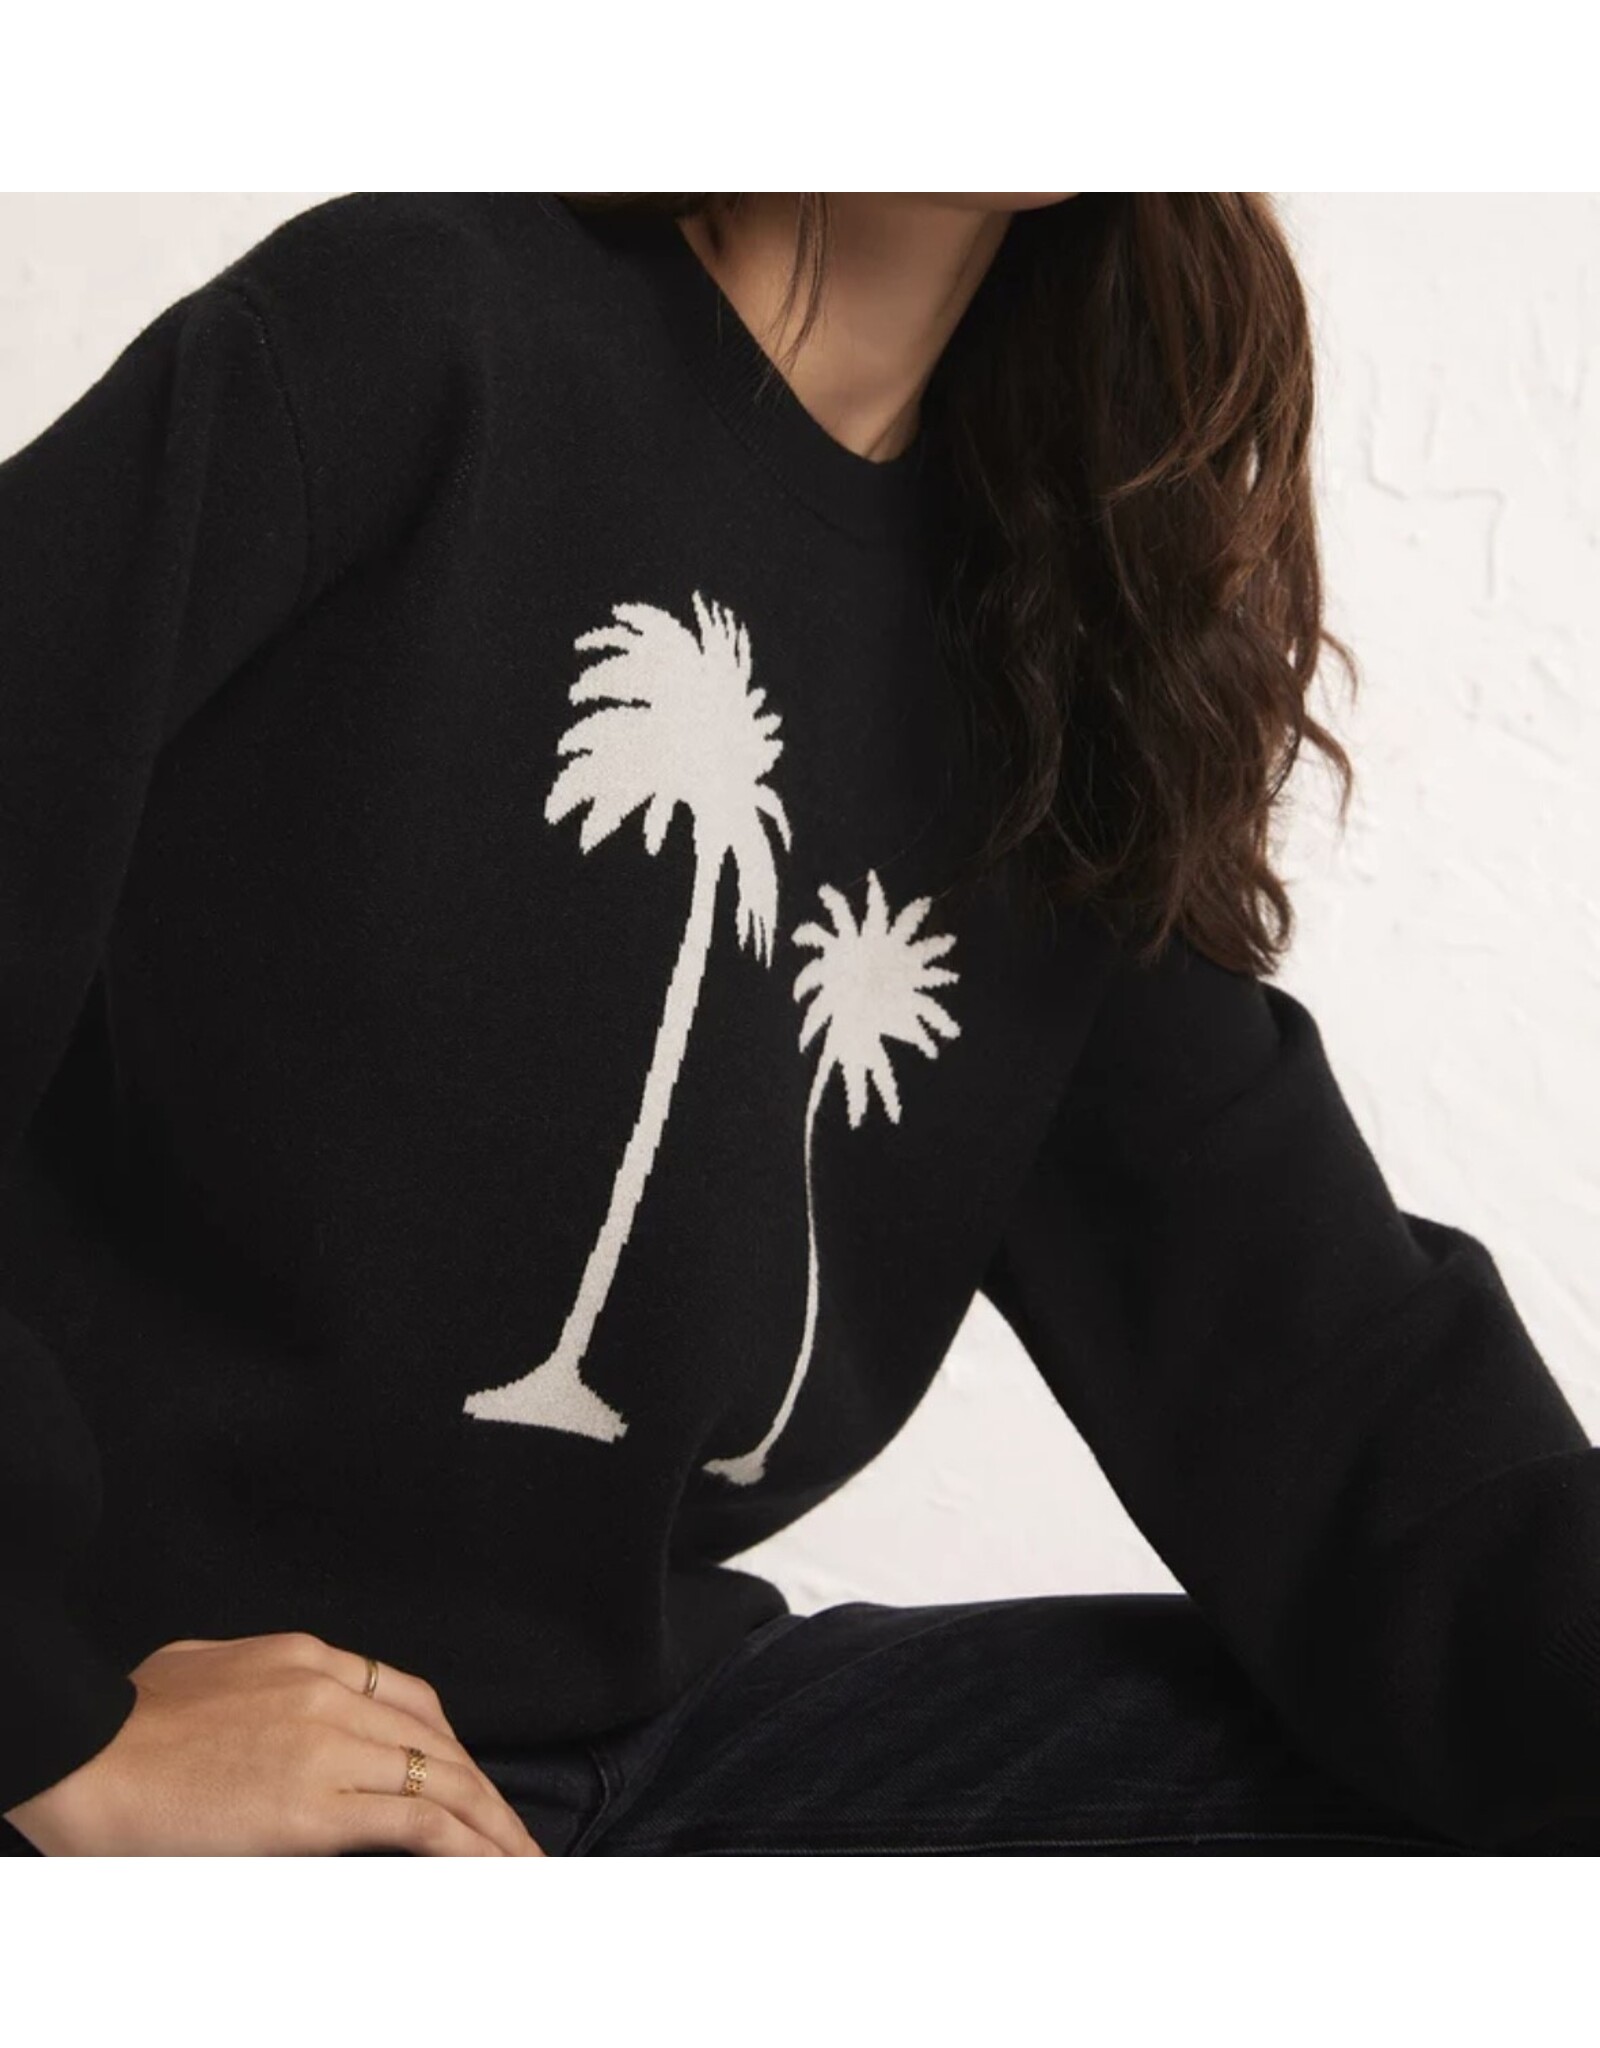 Z Supply Z Supply In the Palms Sweater